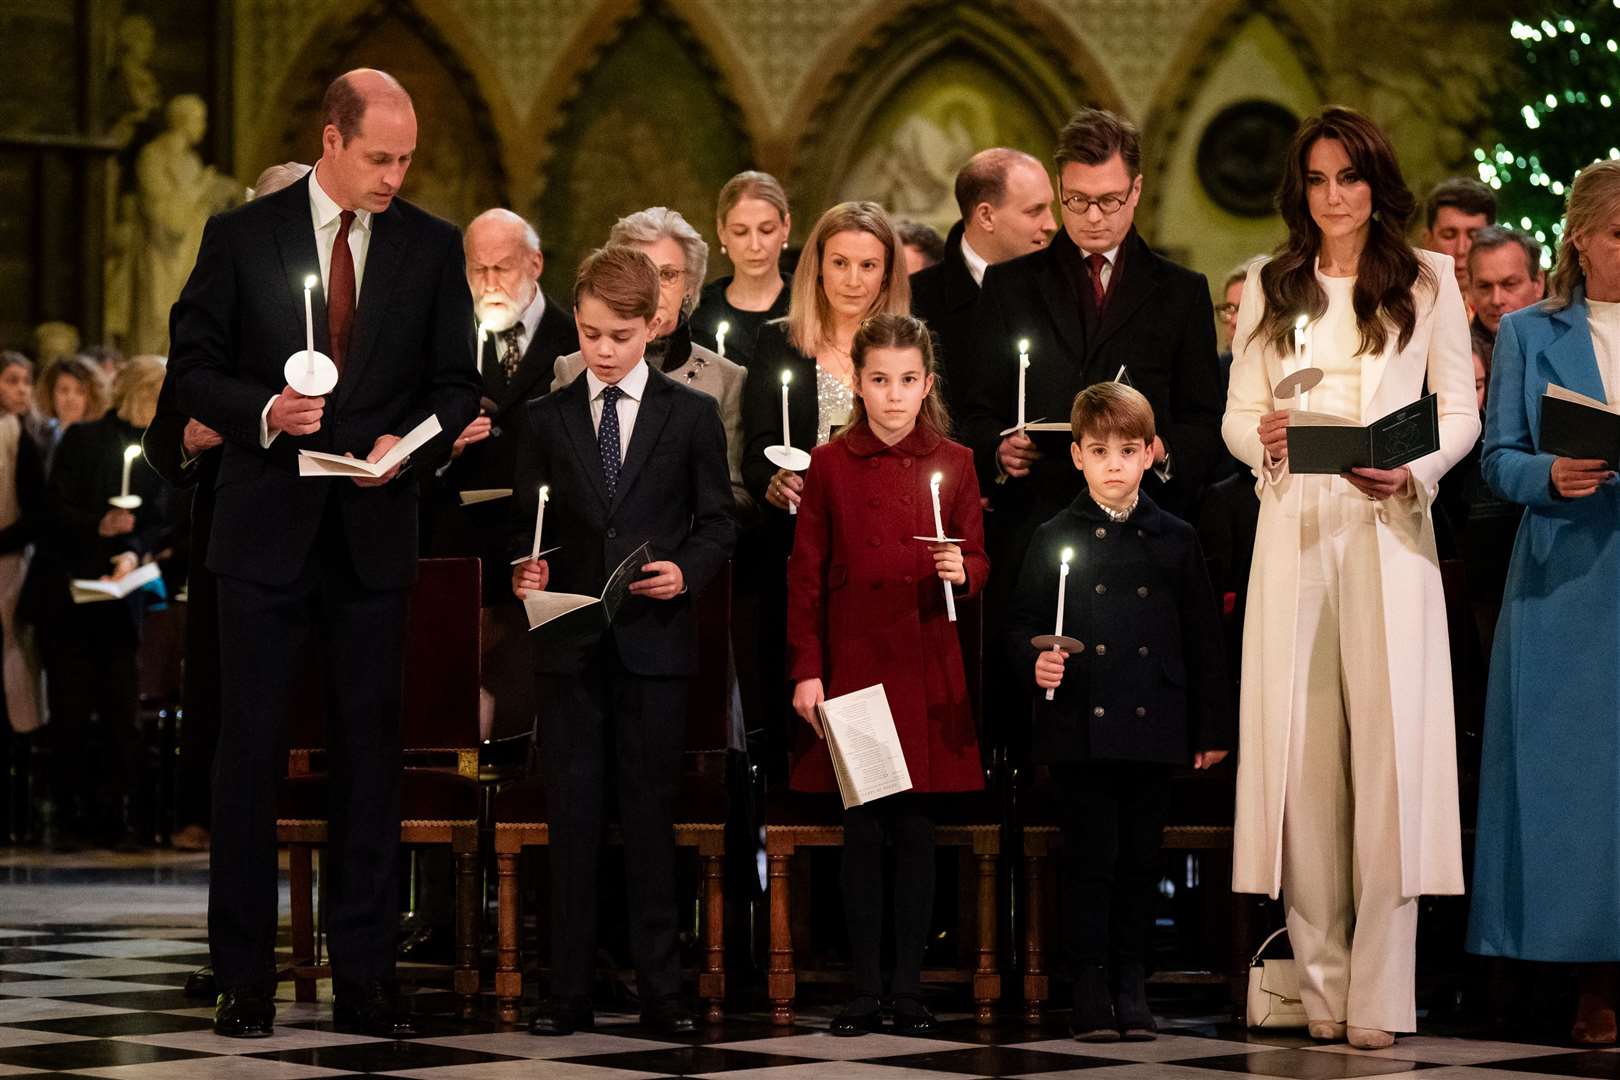 The Wales family at Kate’s Together at Christmas Carol concert (Aaron Chown/PA)